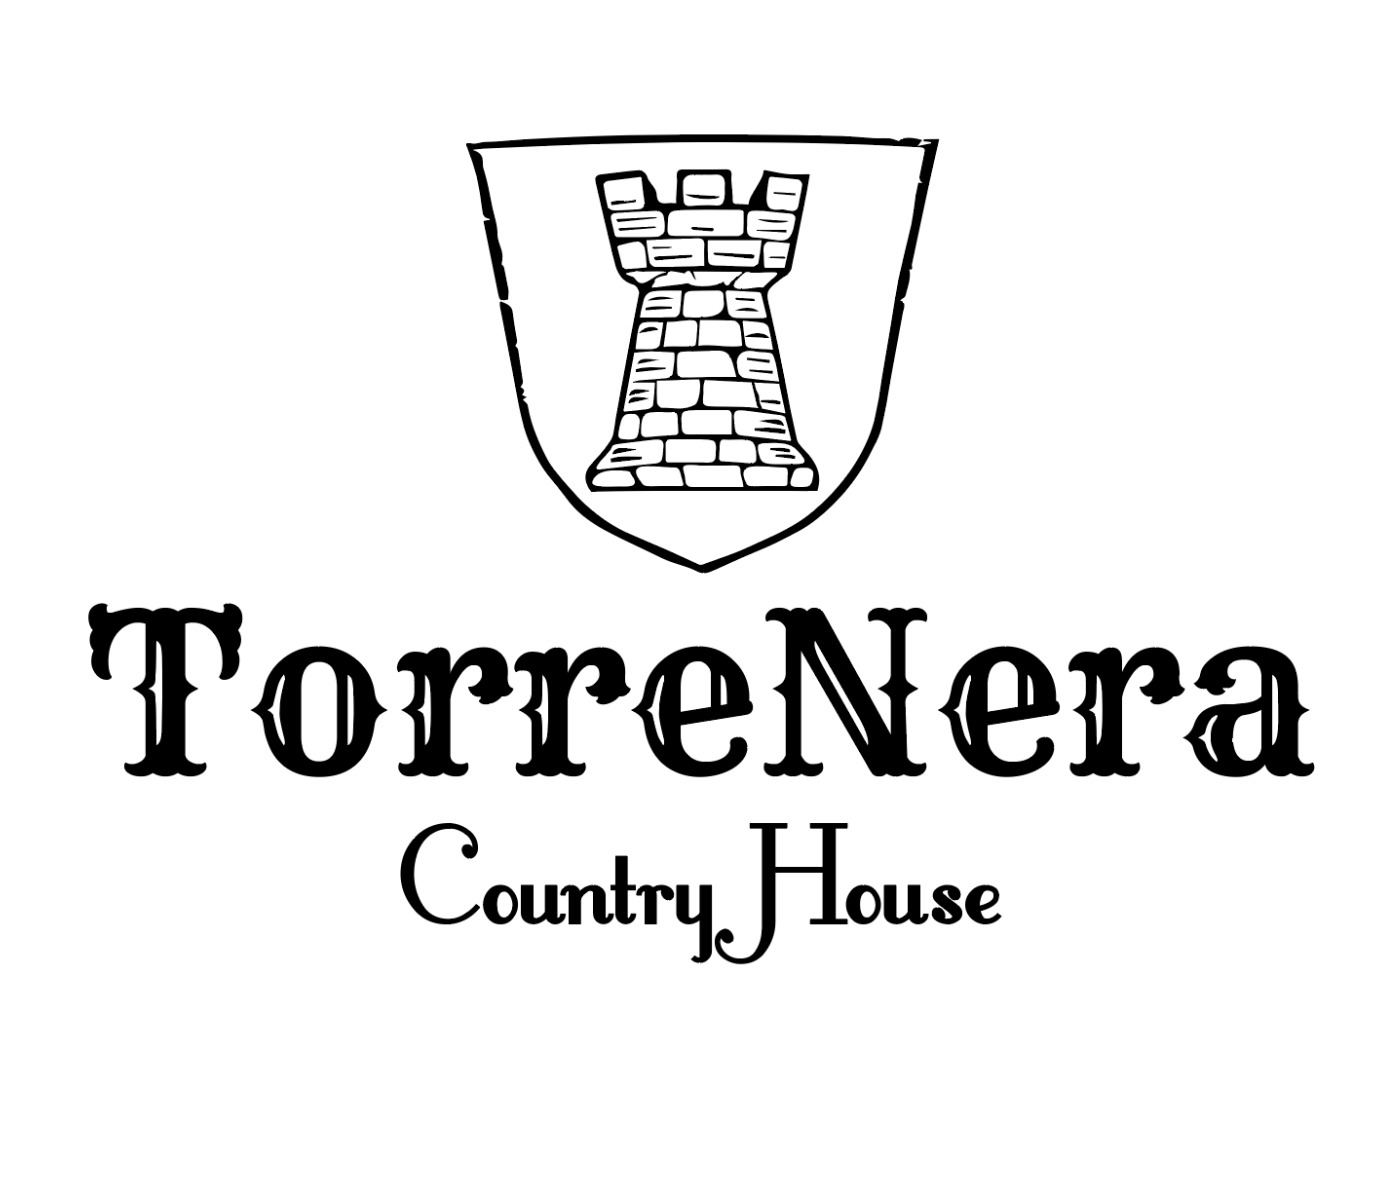 Country House Torrenera